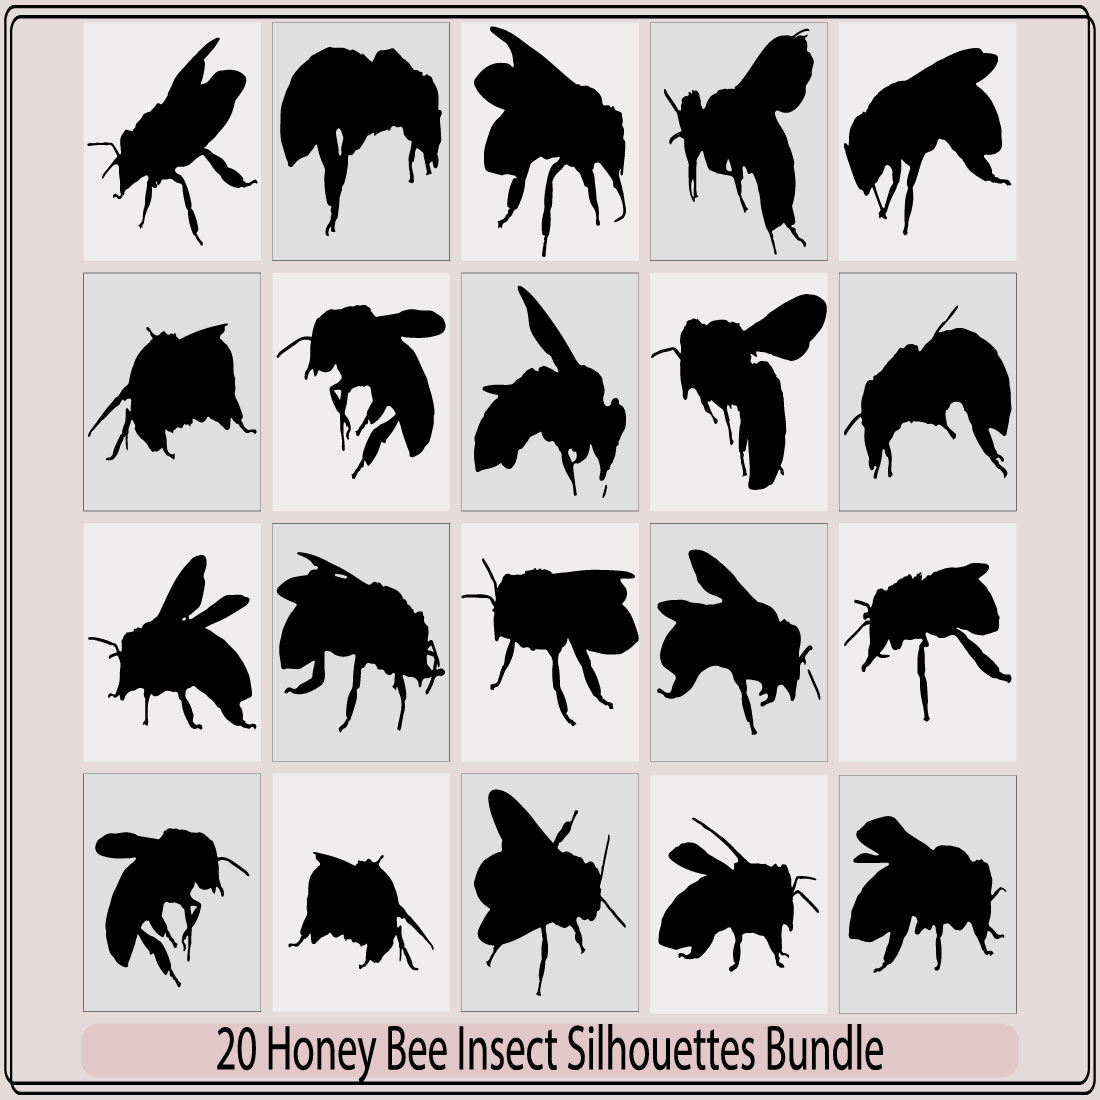 Honeybee silhouettes clipart collection,Bee Icon Bug Logo on White Background Vector,Graphic illustration of silhouette honey bee,bee icon preview image.